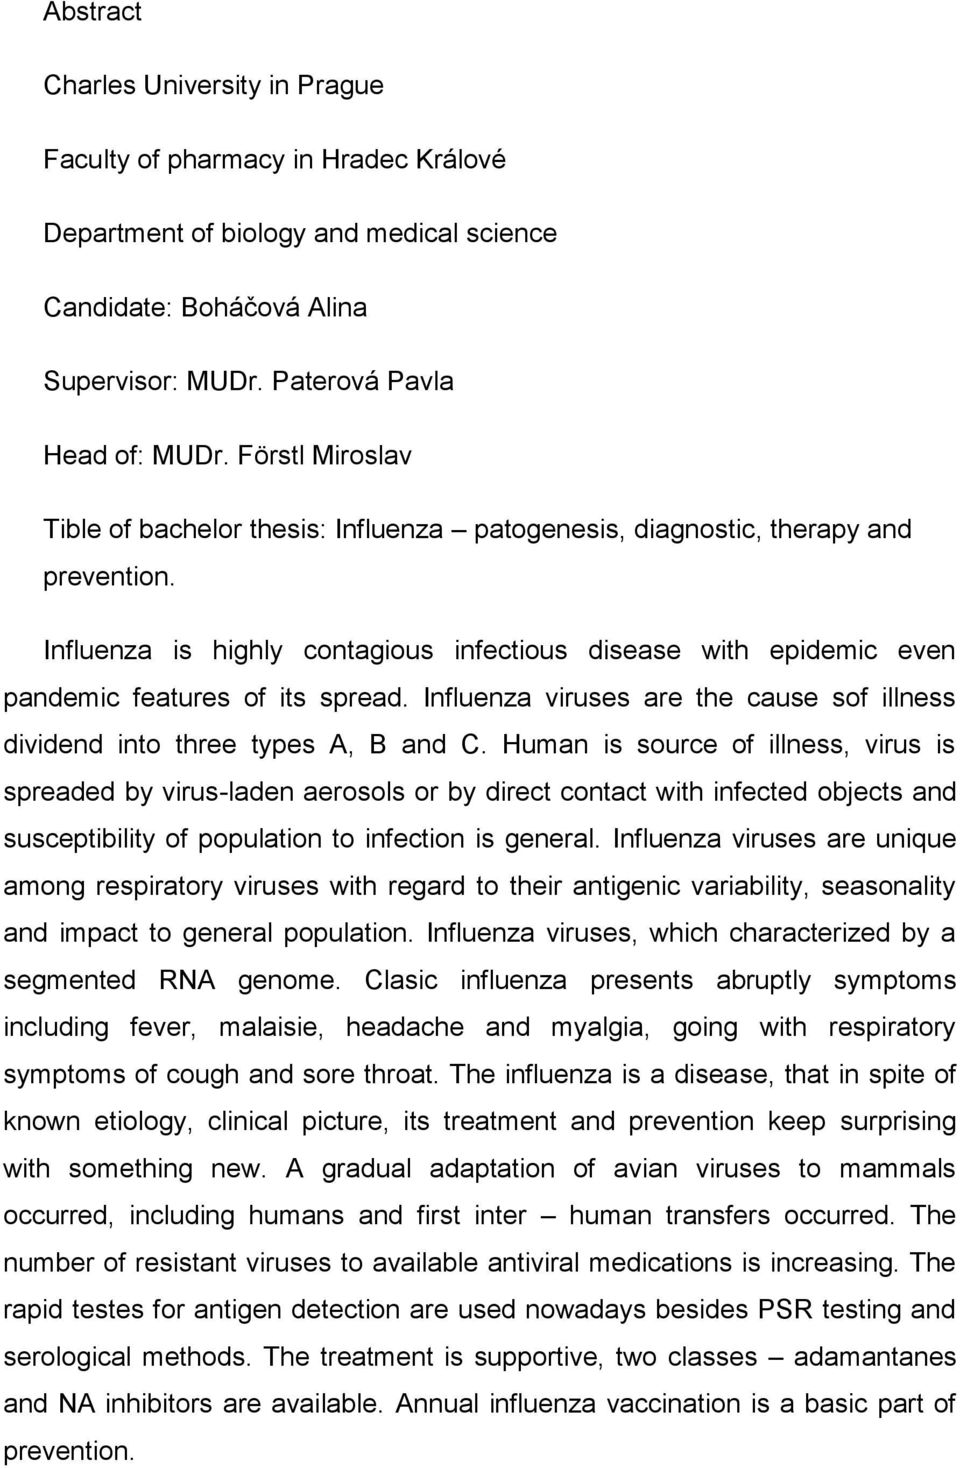 Influenza is highly contagious infectious disease with epidemic even pandemic features of its spread. Influenza viruses are the cause sof illness dividend into three types A, B and C.